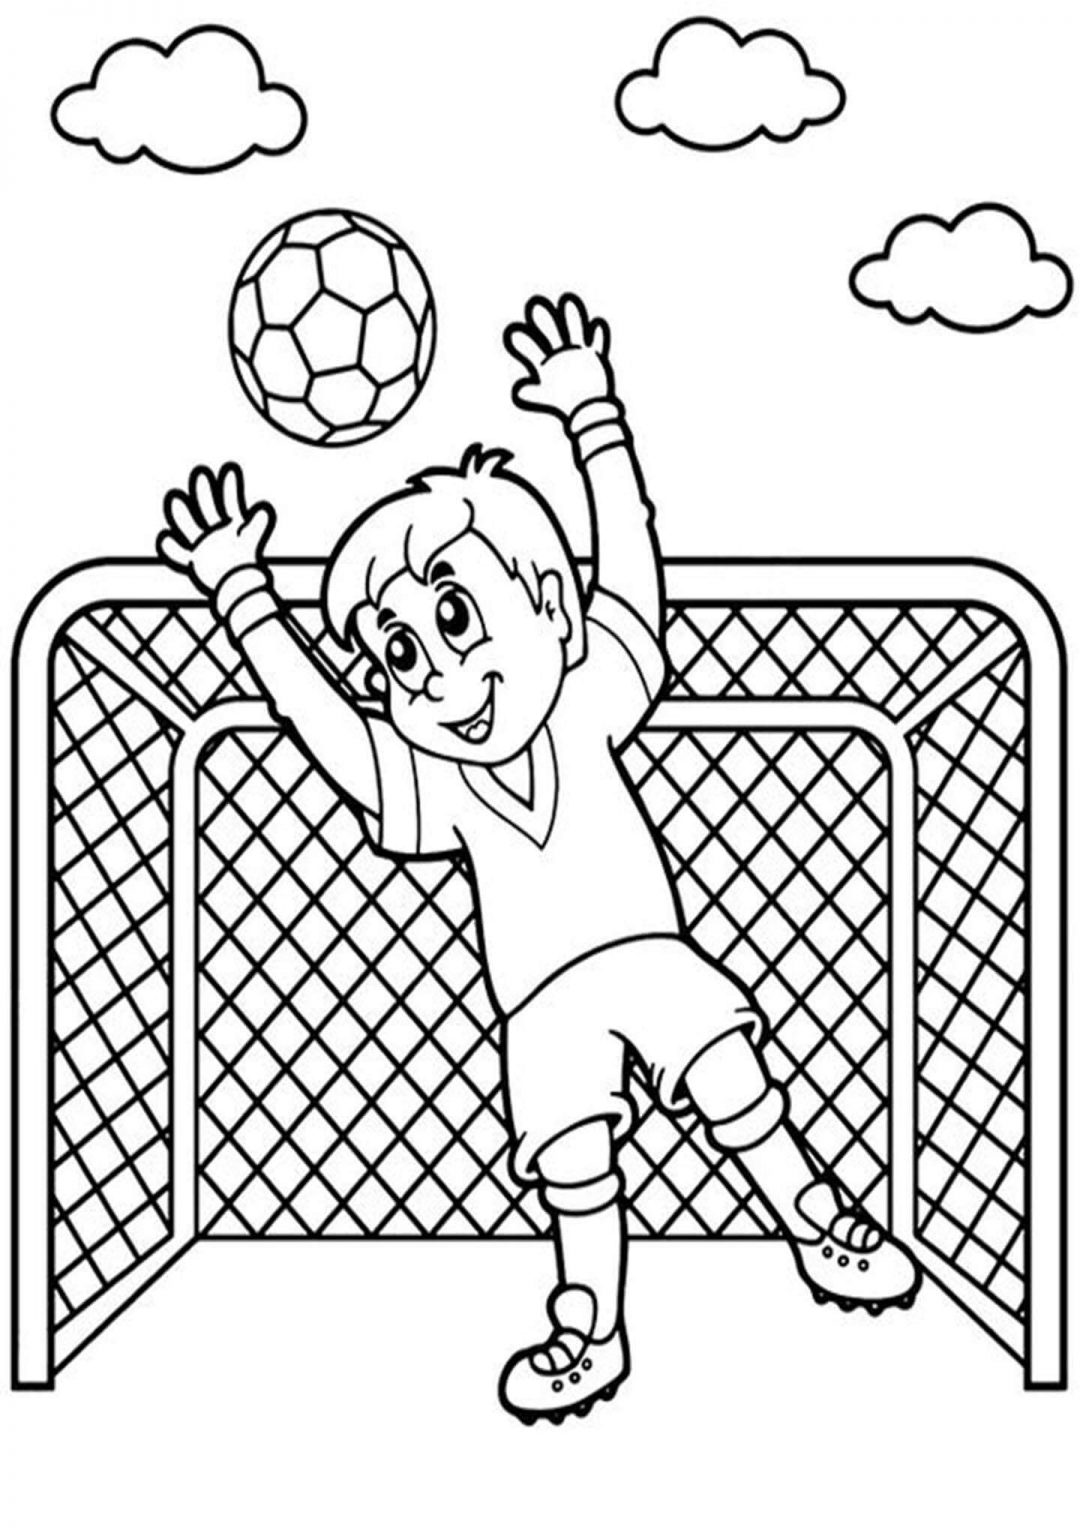 Free &Amp; Easy To Print Soccer Coloring Pages - Tulamama